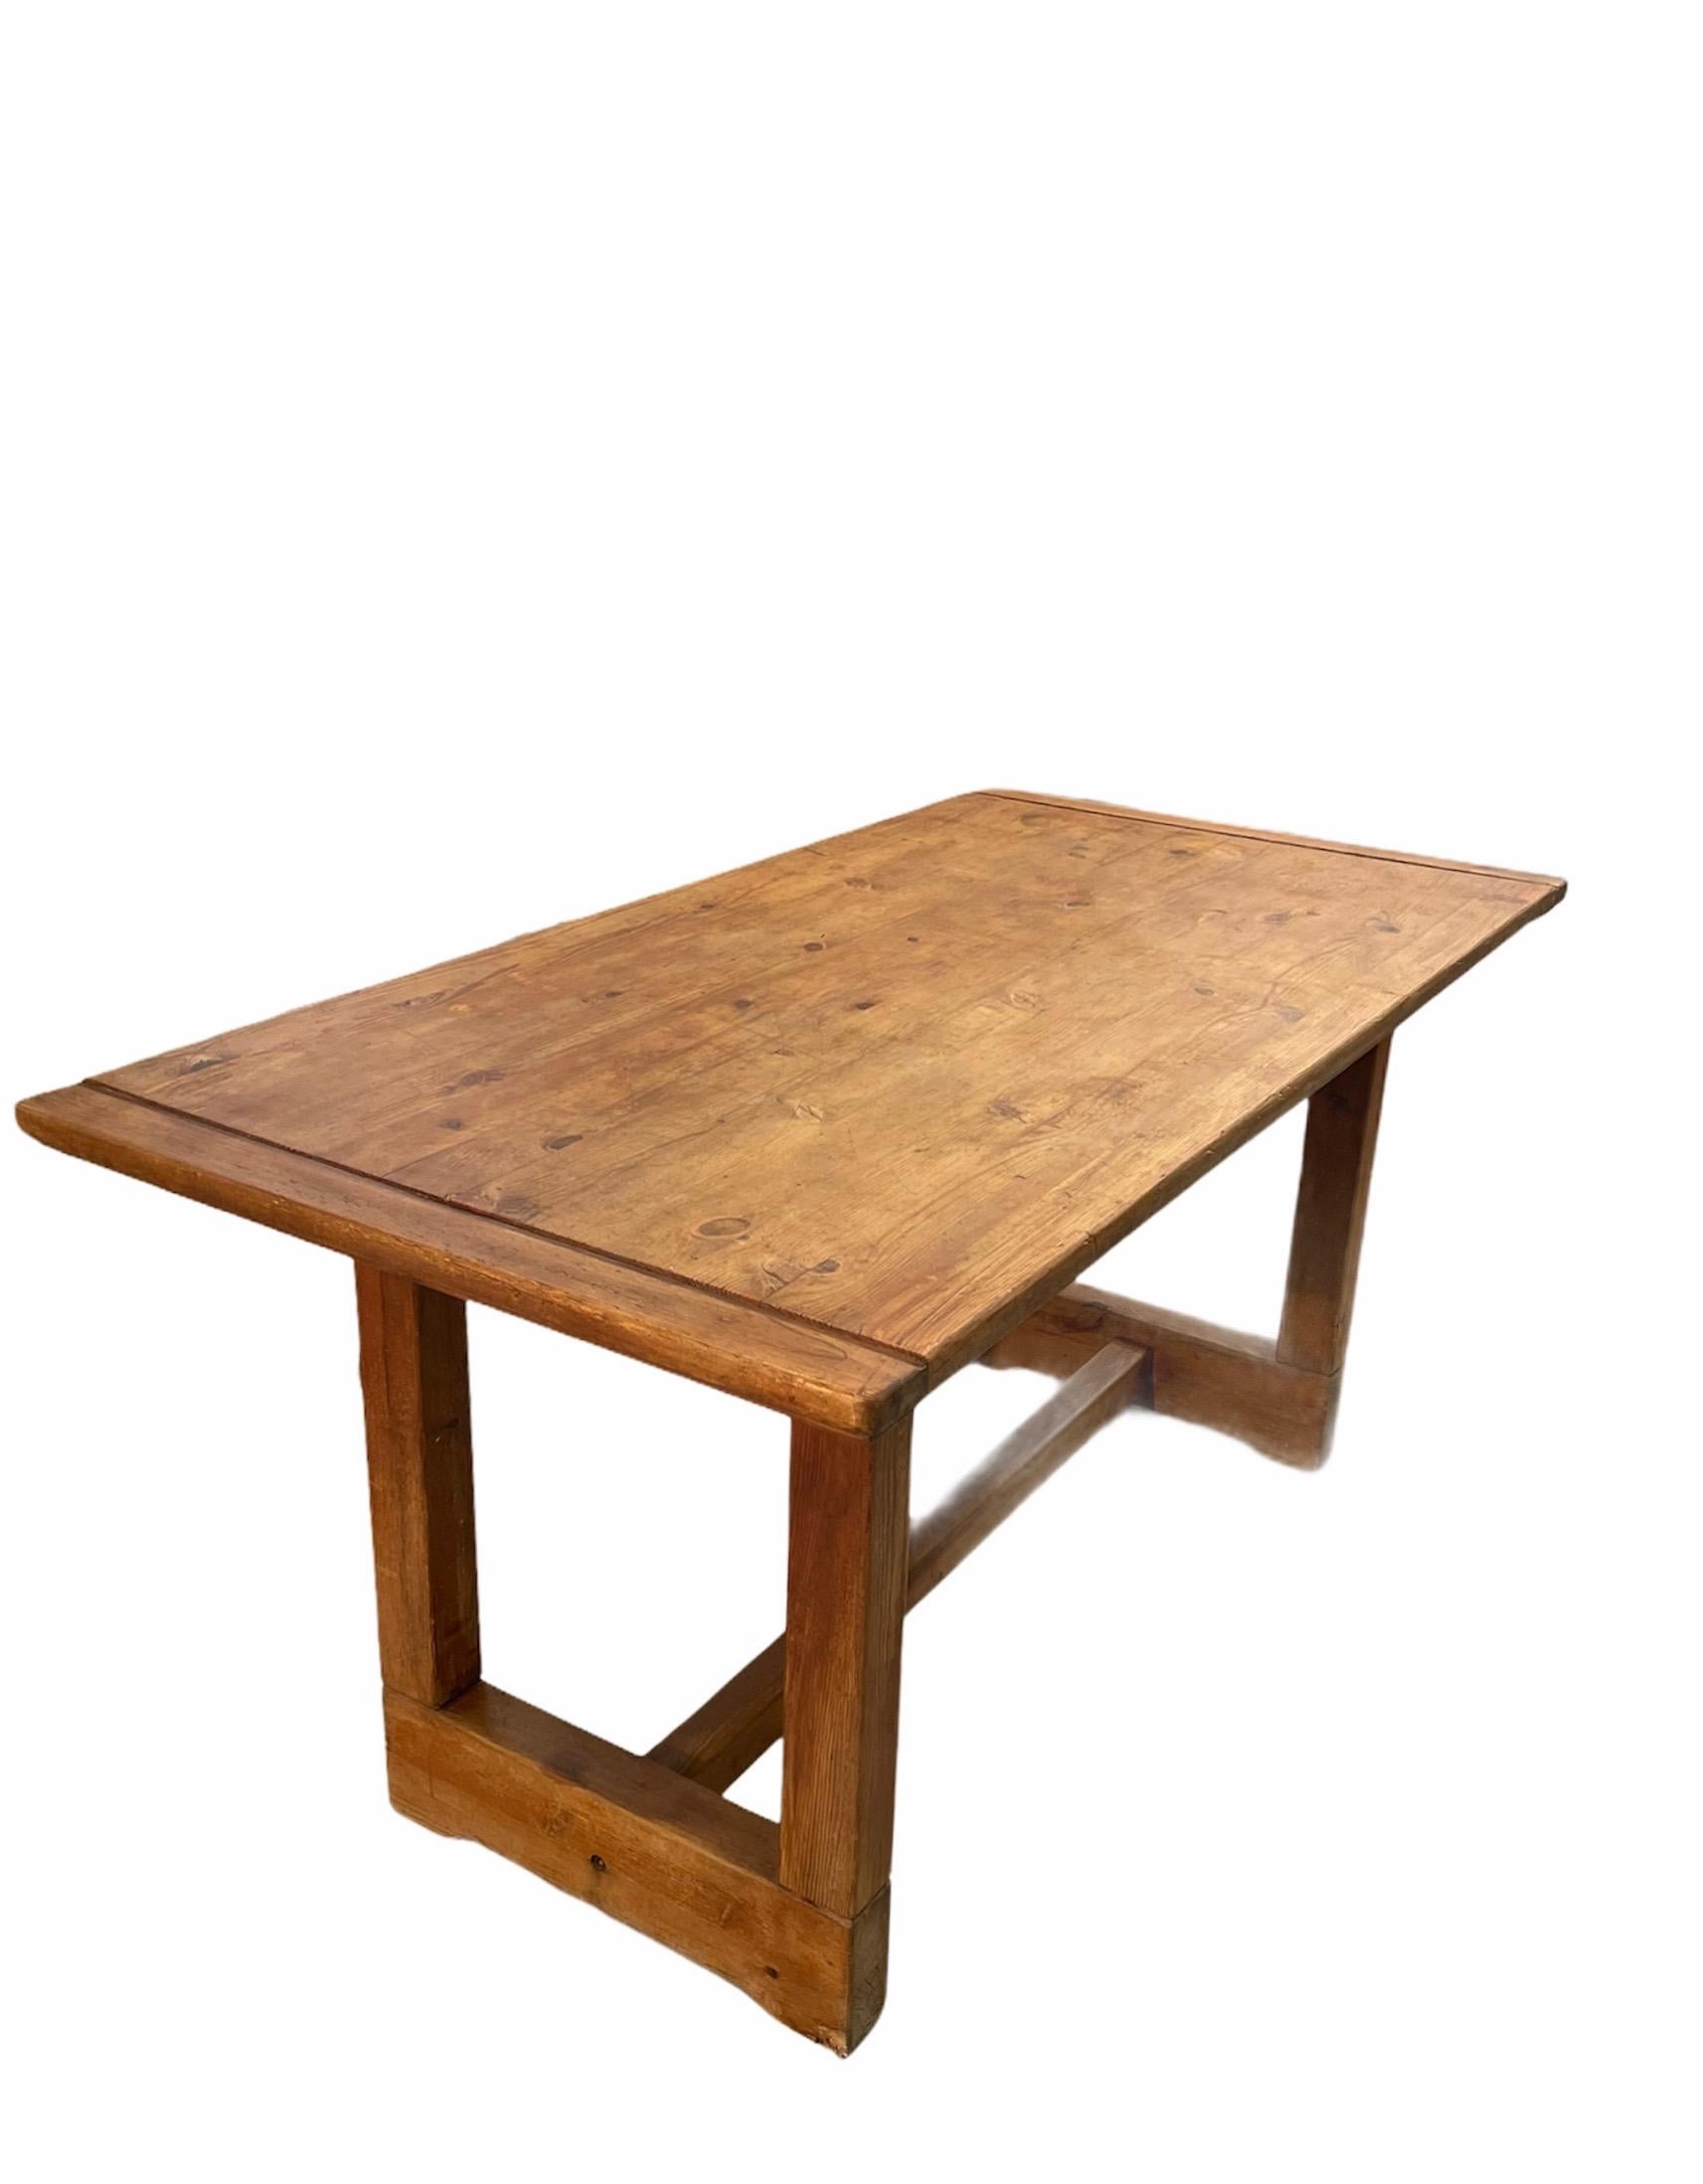 Amazing midcentury pine wood dining room farm table. This fantastic piece was made in Italy during the 1950s.

This fascinating pine table has two easels and finishes marvellously worn by years of use. It's a perfect dining table, but it can be